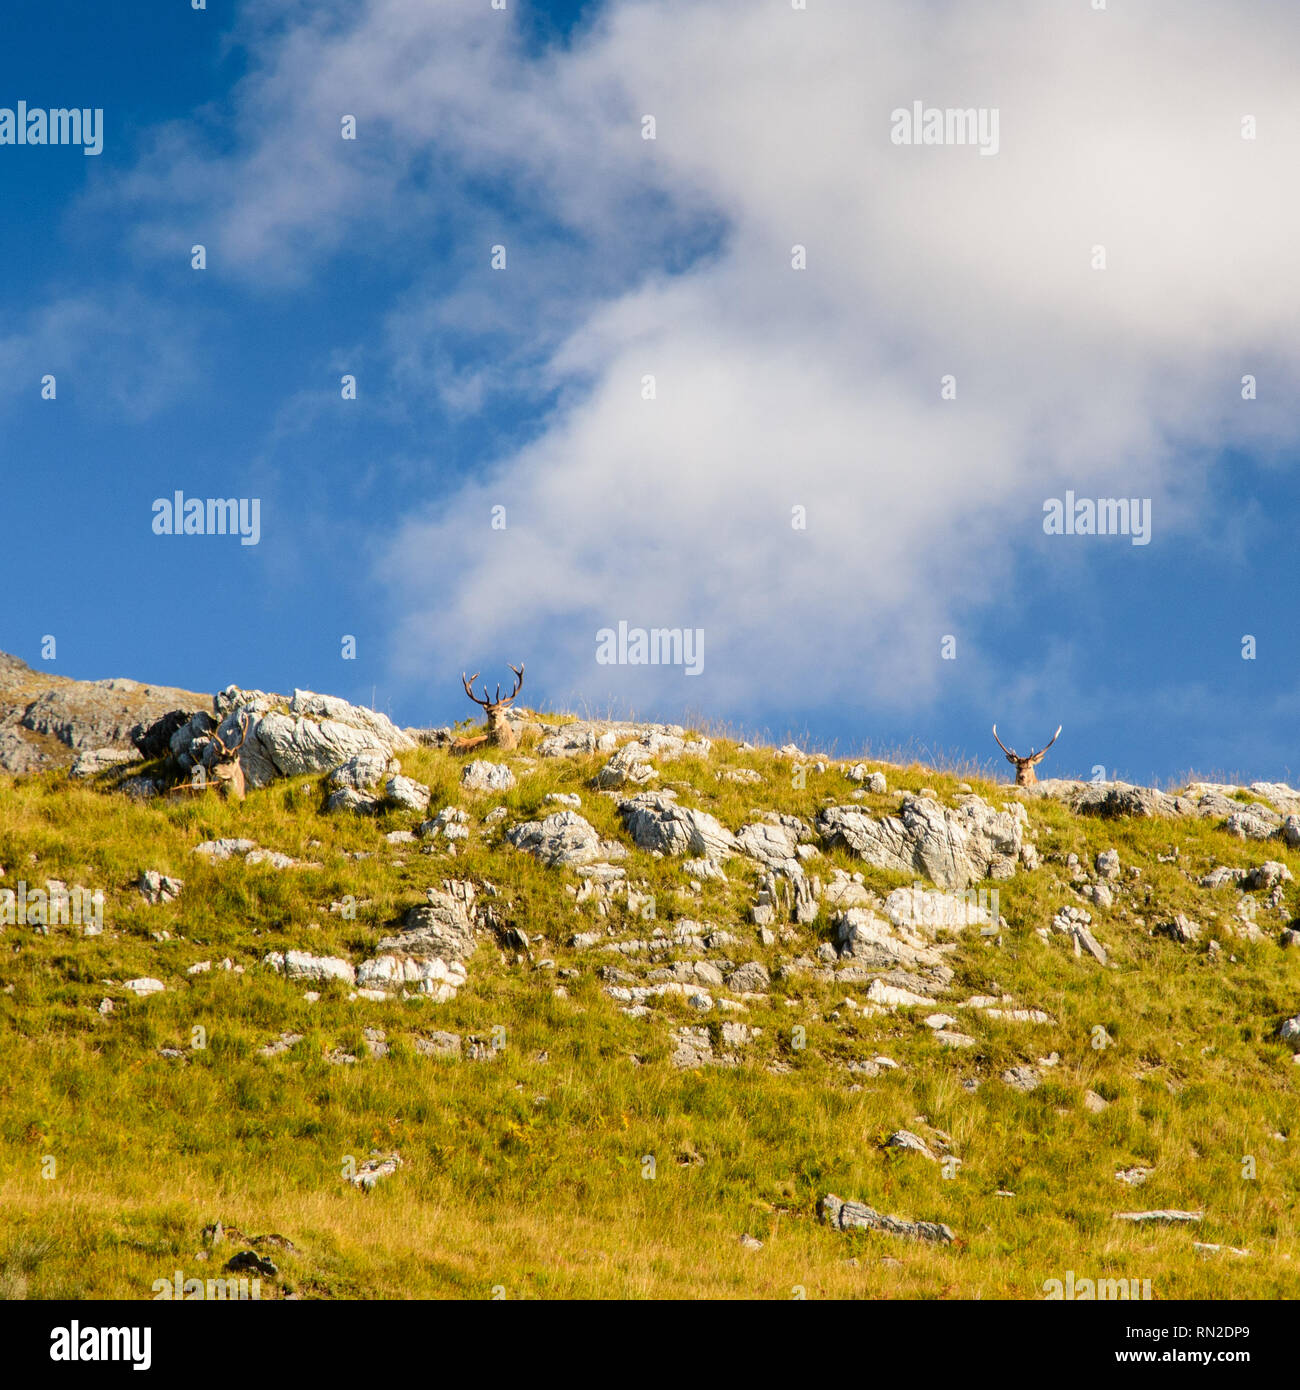 A stag deer looks out from the mountainside in Assynt in the Highlands of Scotland. Stock Photo